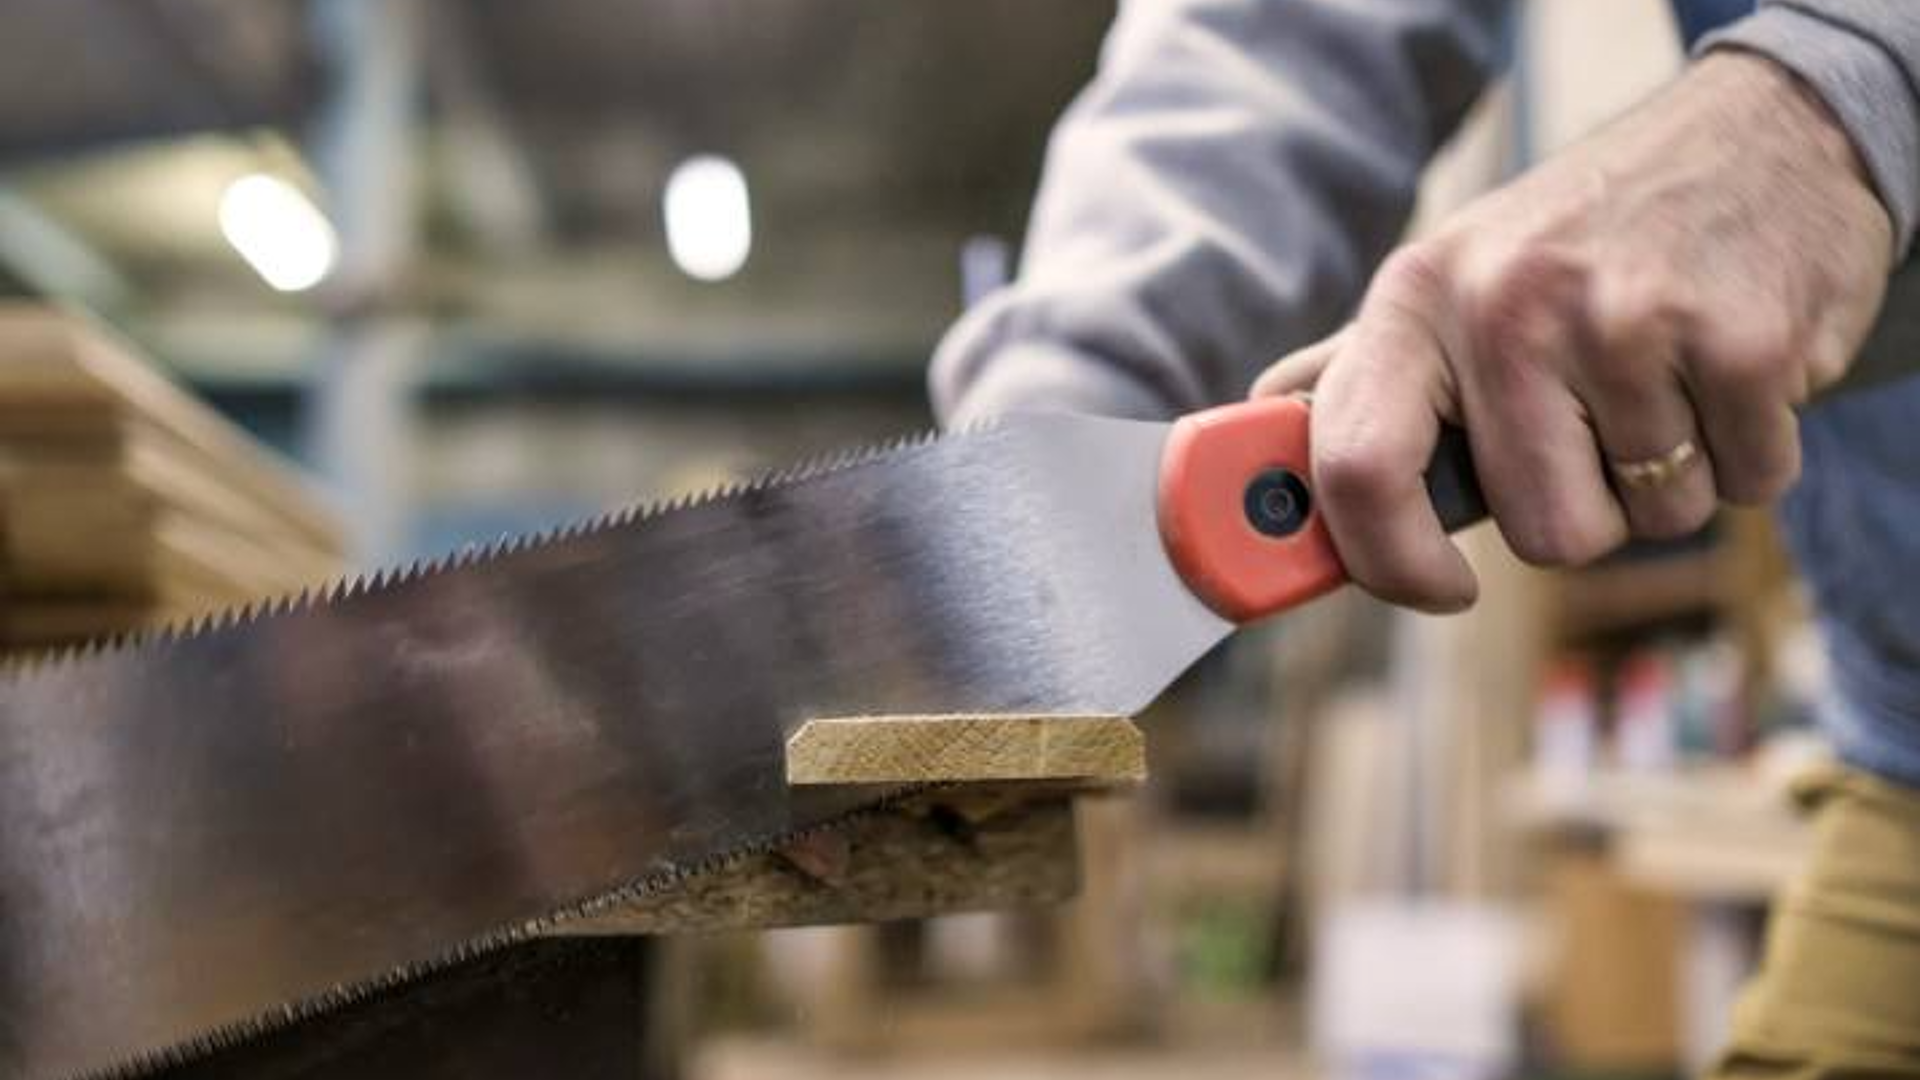 Handyman Tools - The Complete List For Starting A Business